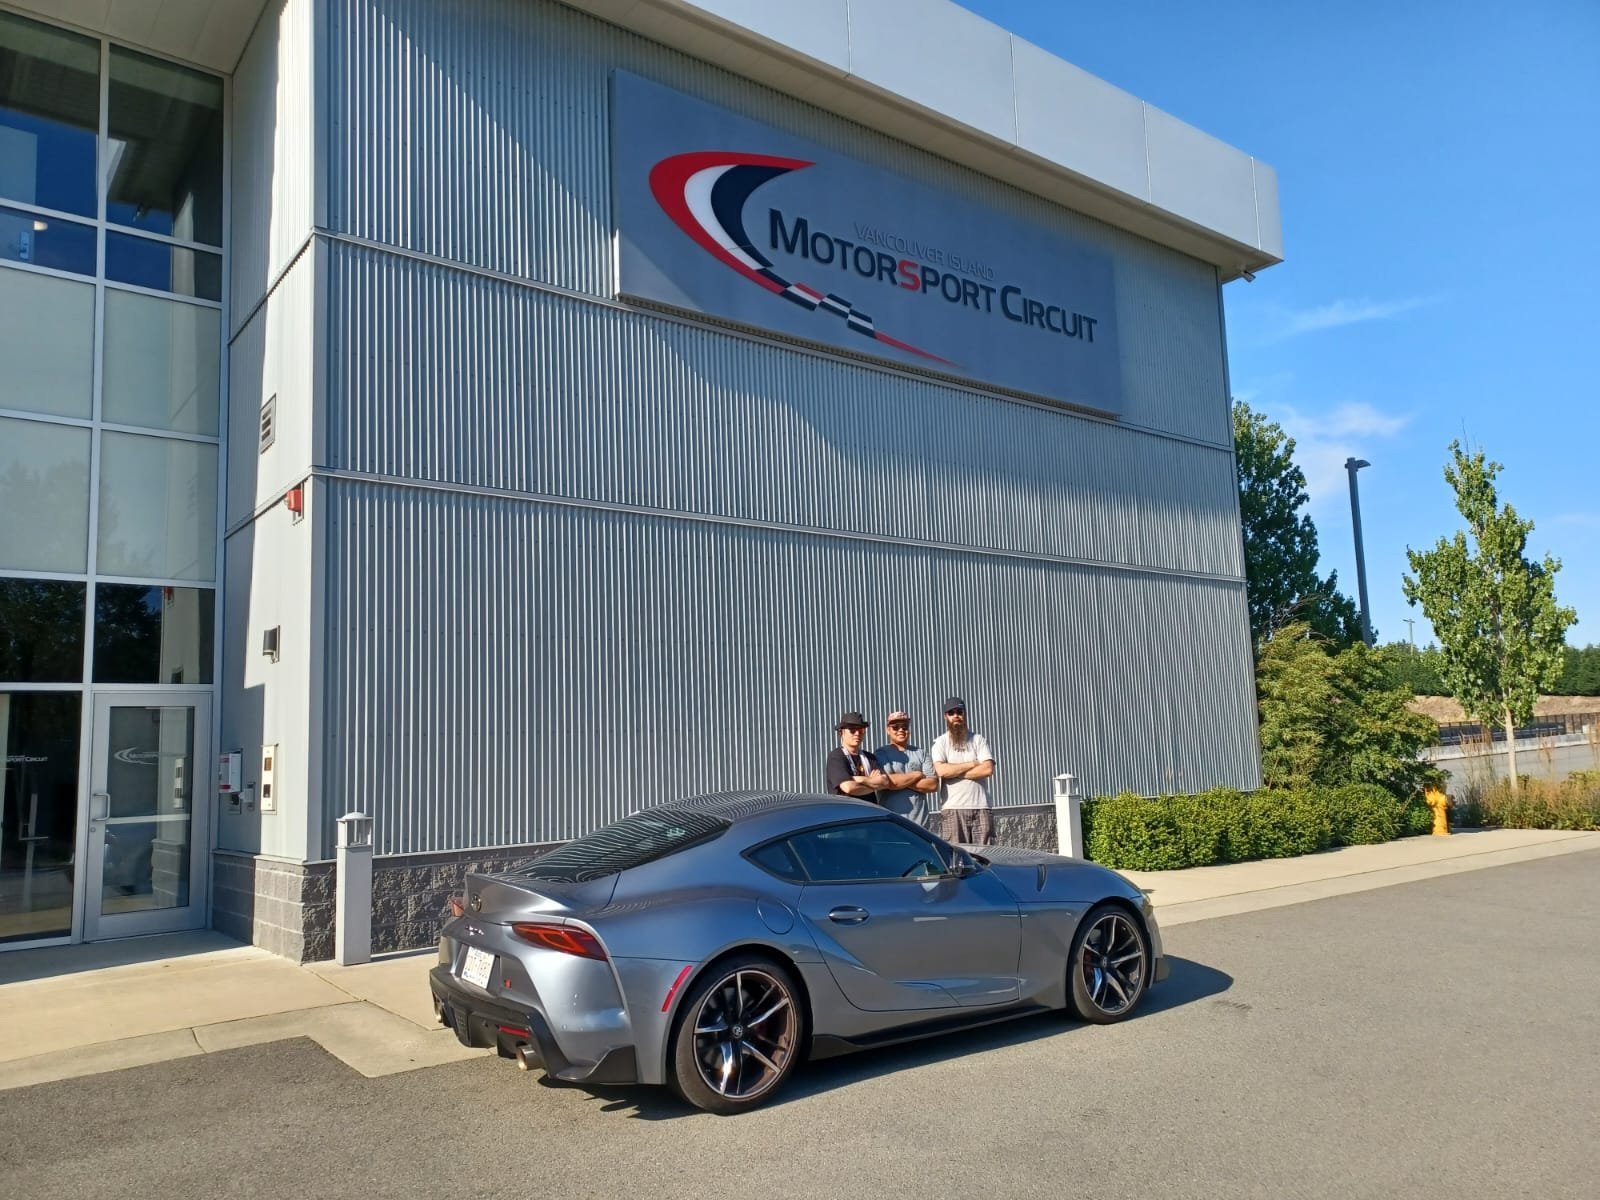 Group of drivers outside Motorsport Circuit building after high performance driving event